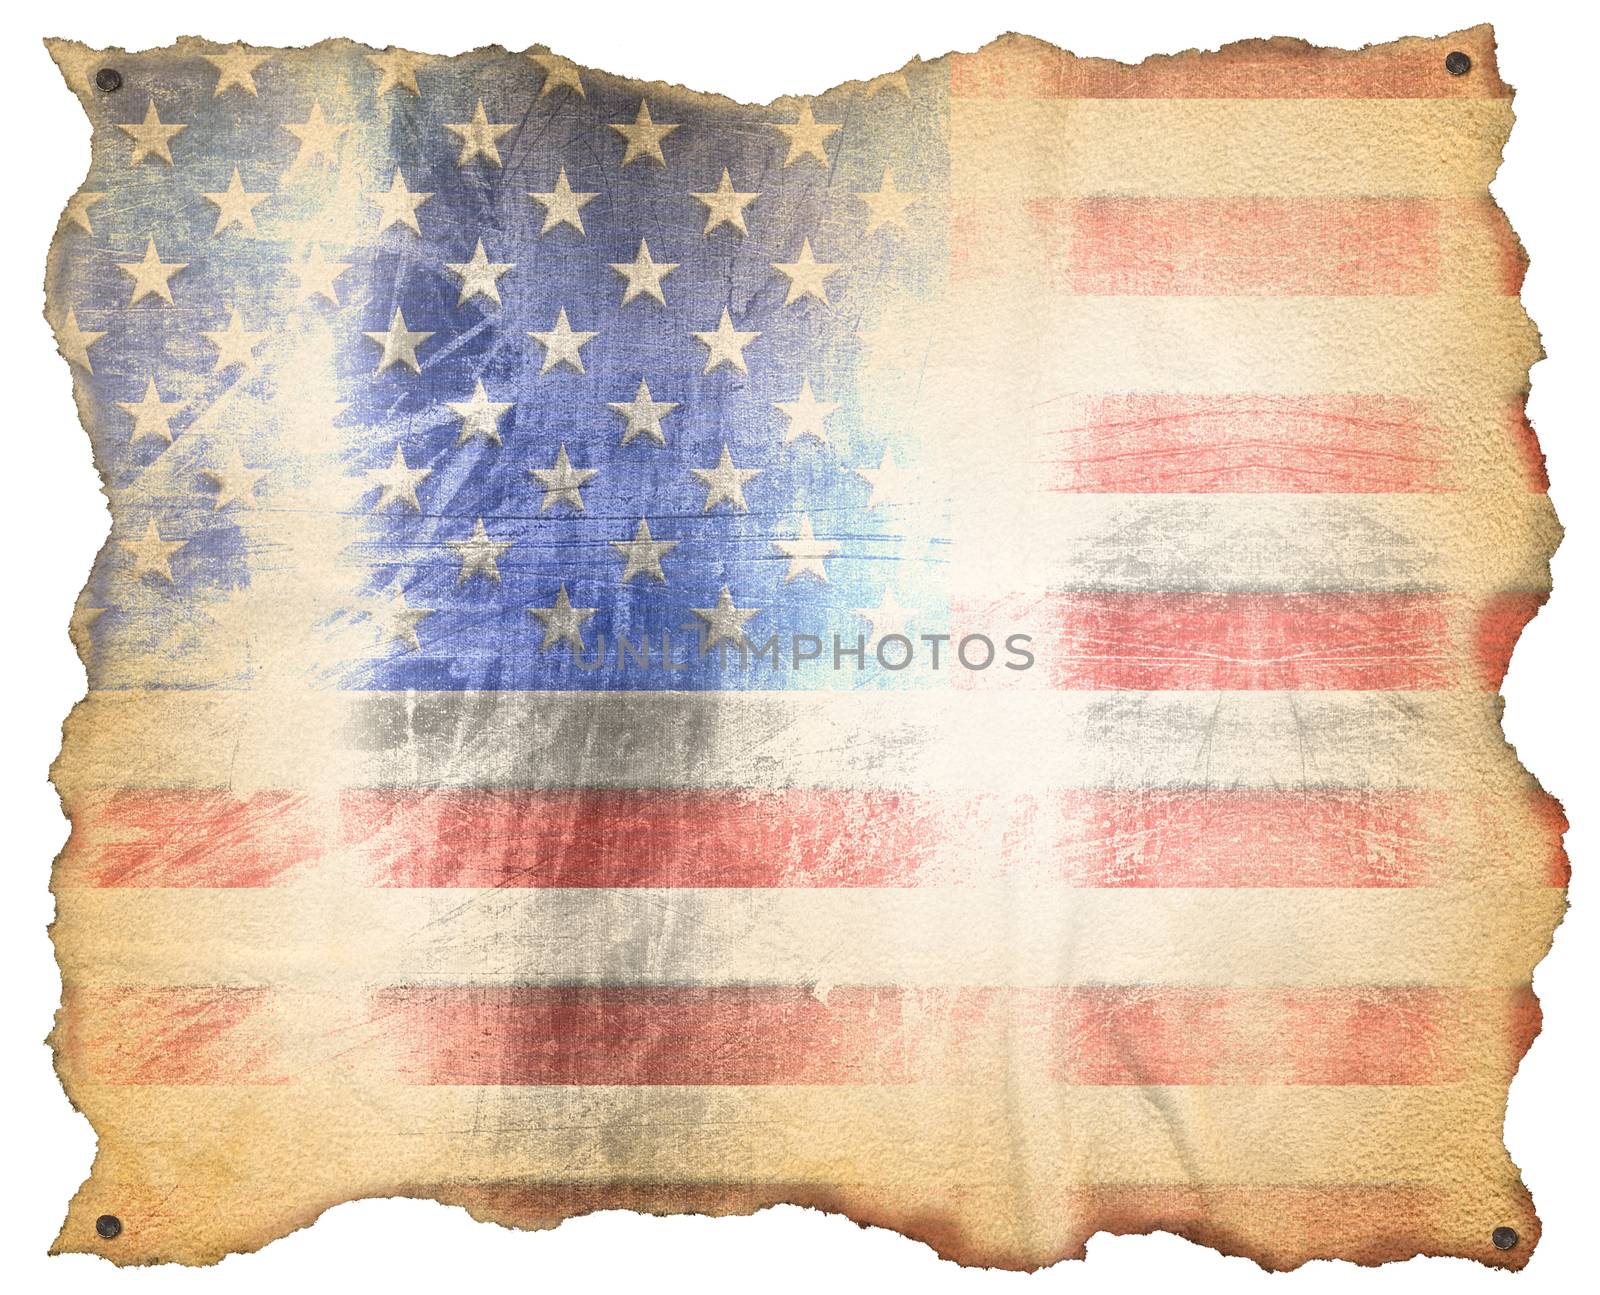 Weathered American flag on a old brown parchment with nails. Isolated on white background